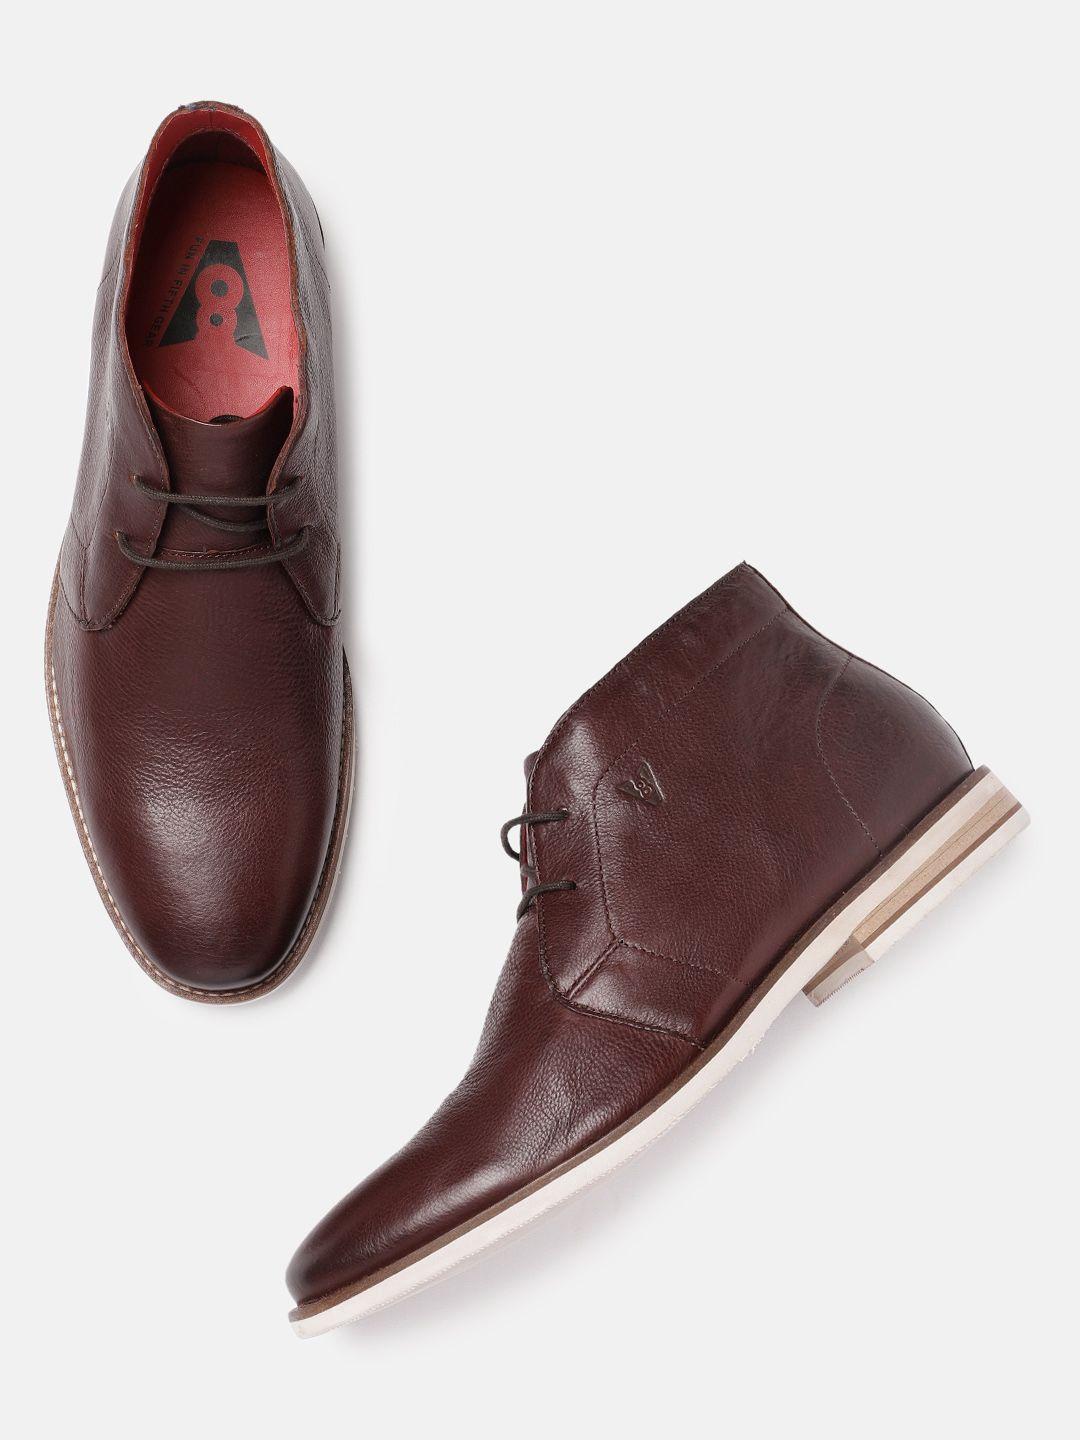 v8-by-ruosh-men-brown-venice-leather-flat-boots